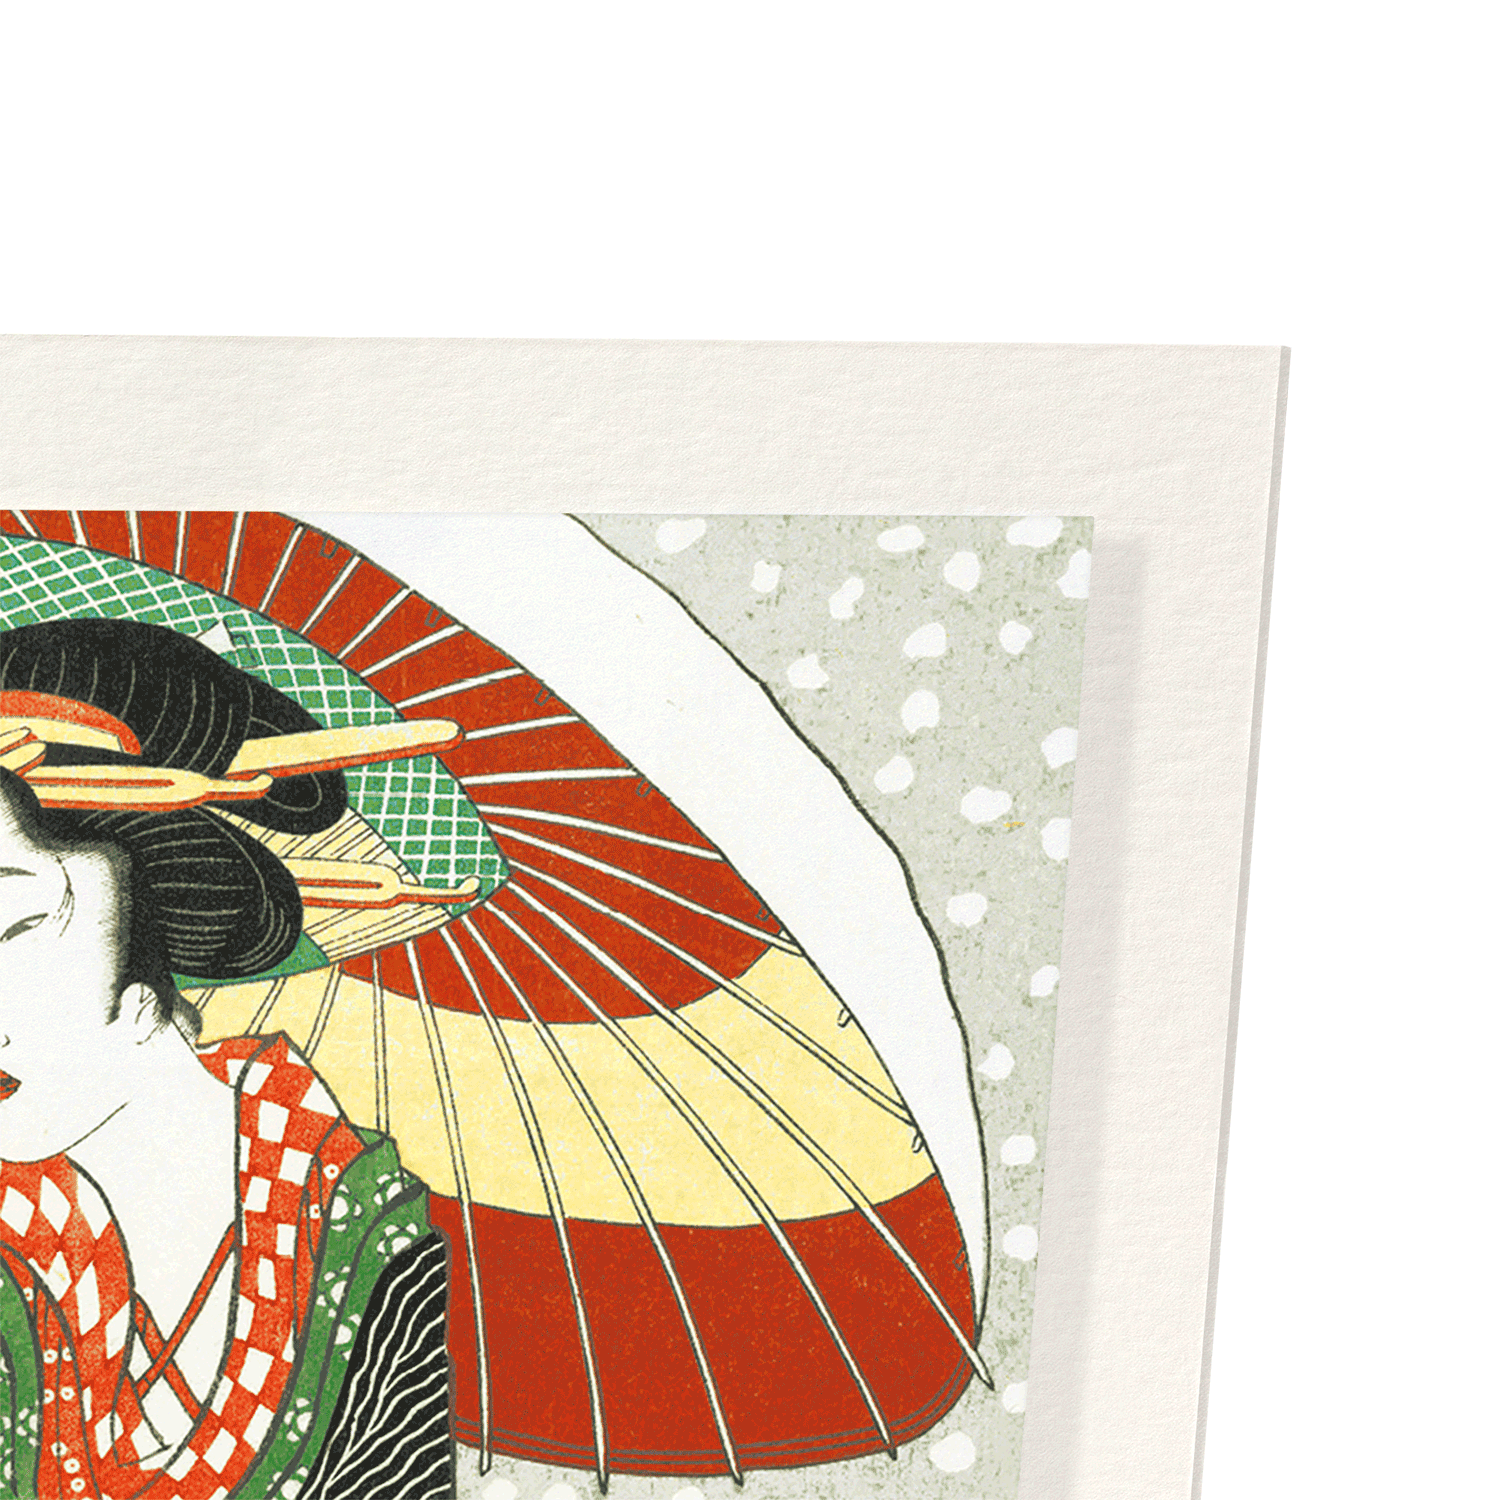 BEAUTY IN THE SNOW: Japanese Art Print